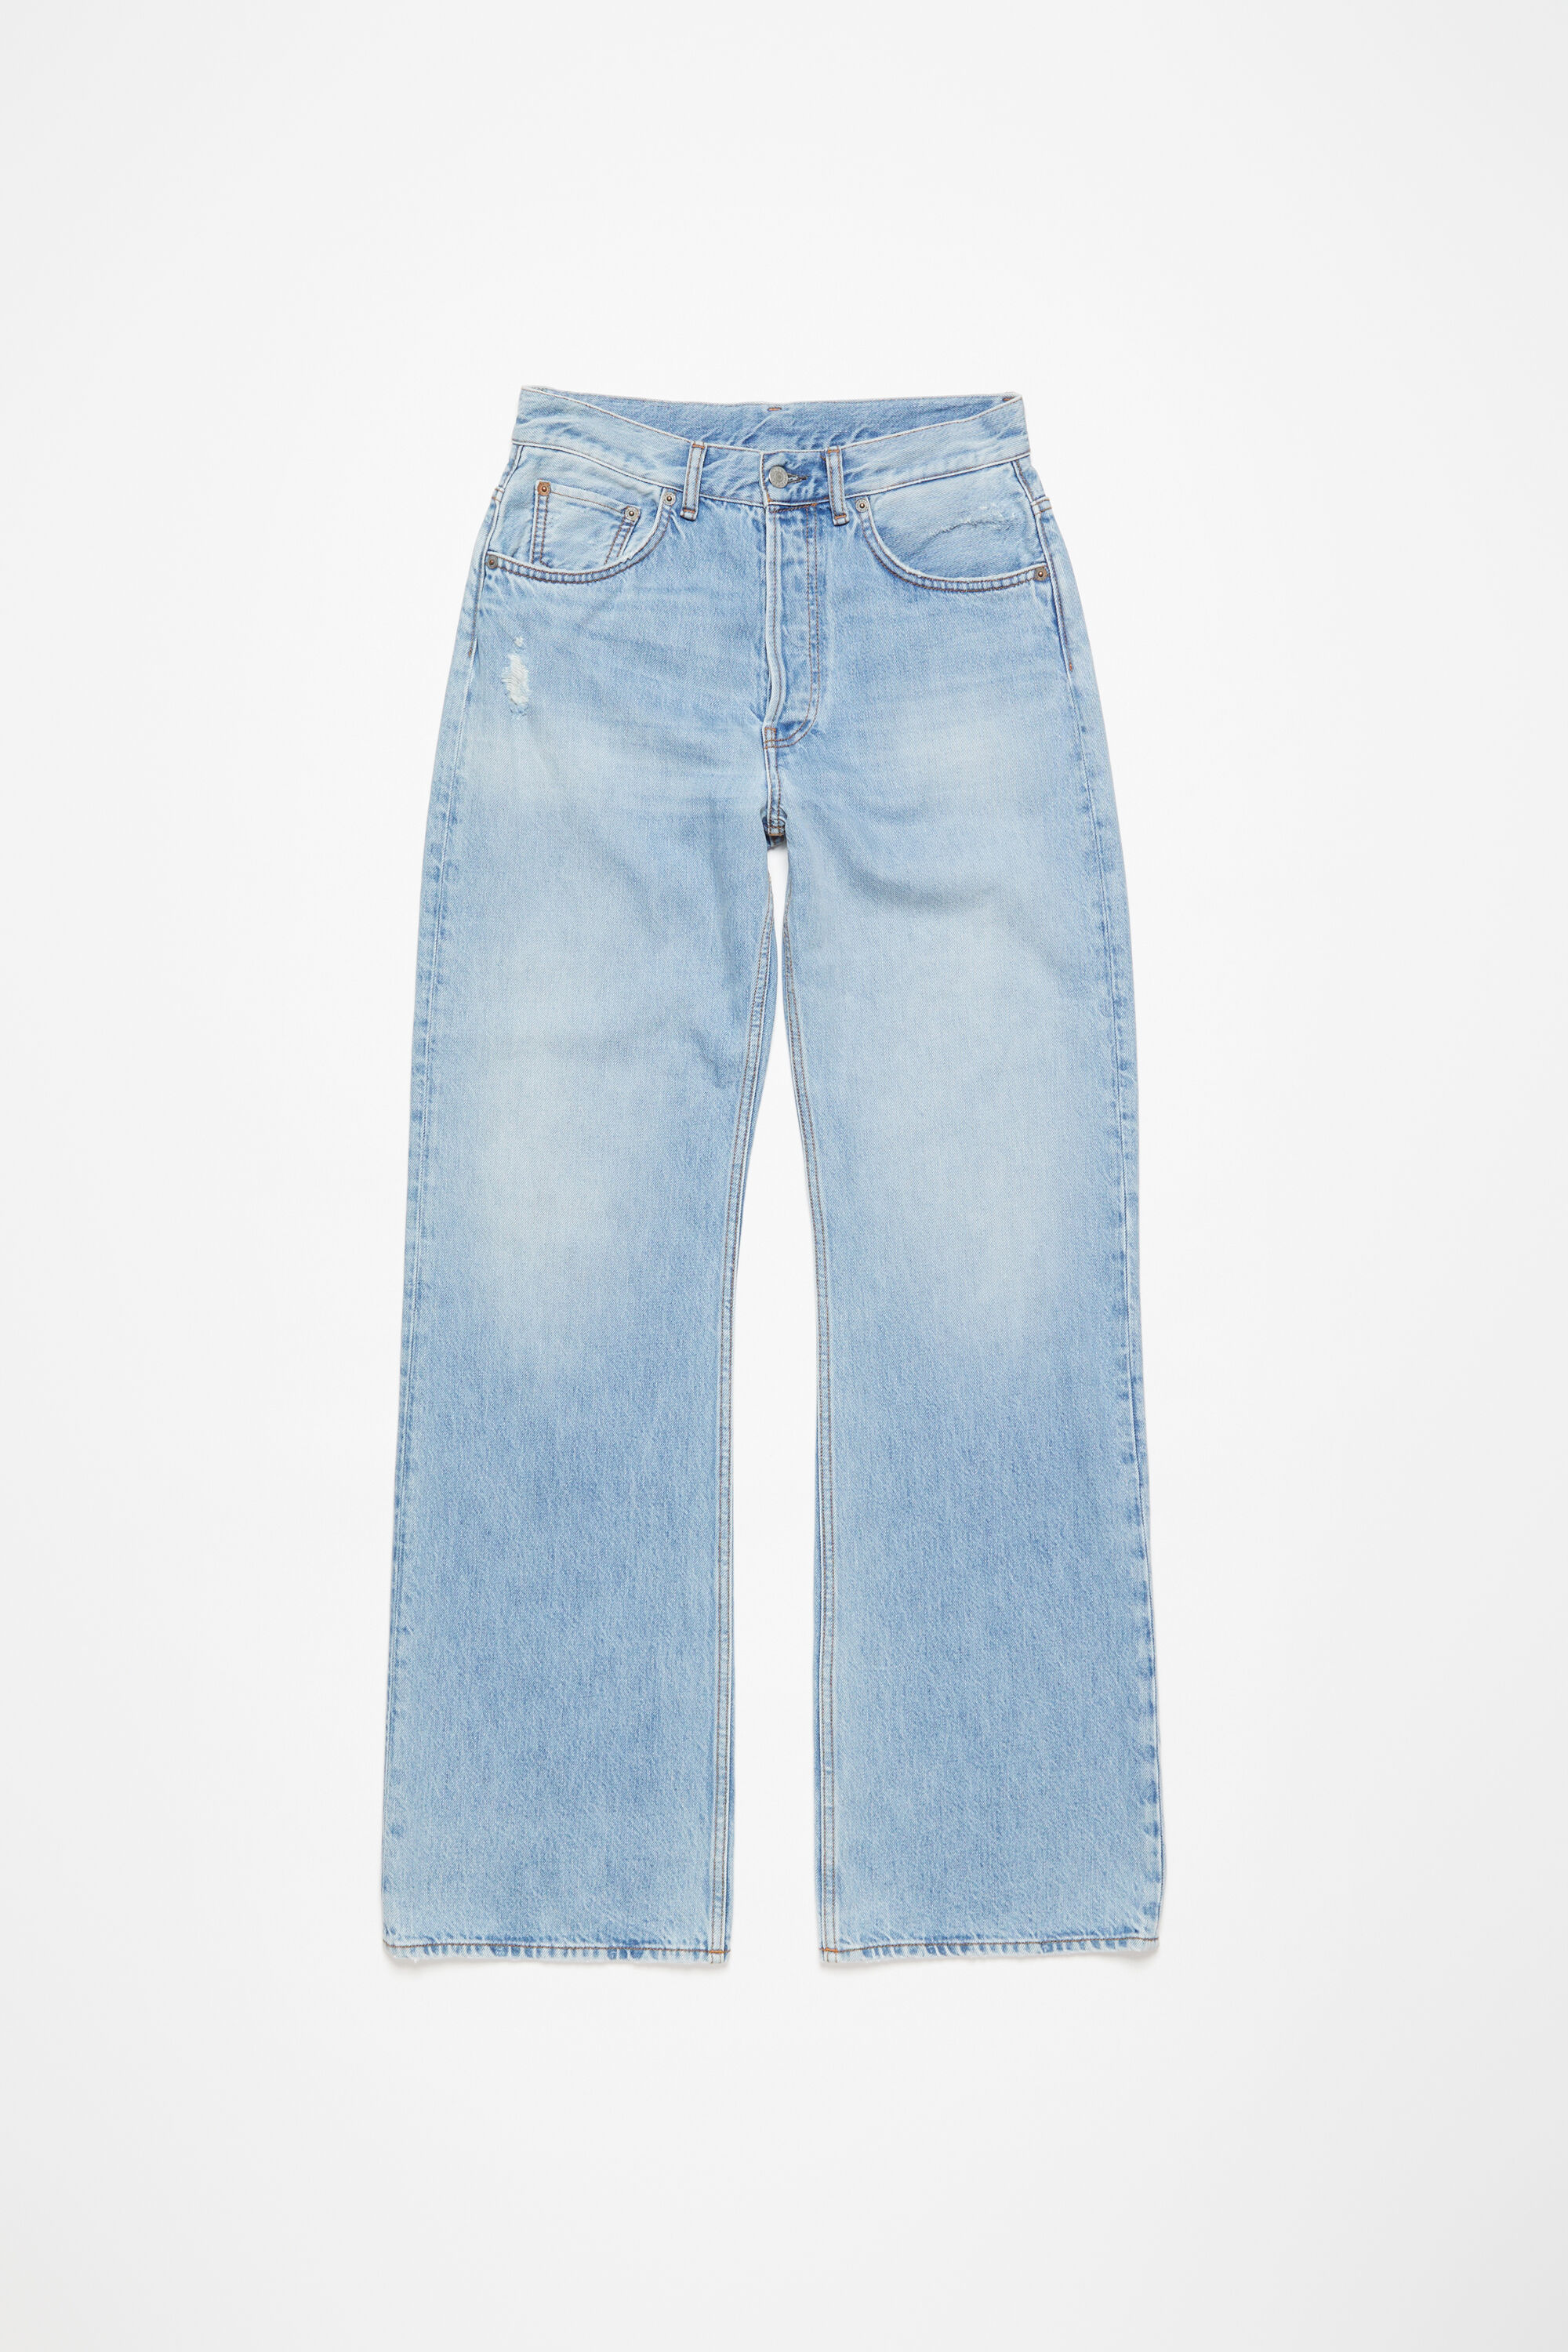 acne studious loose fit jeans